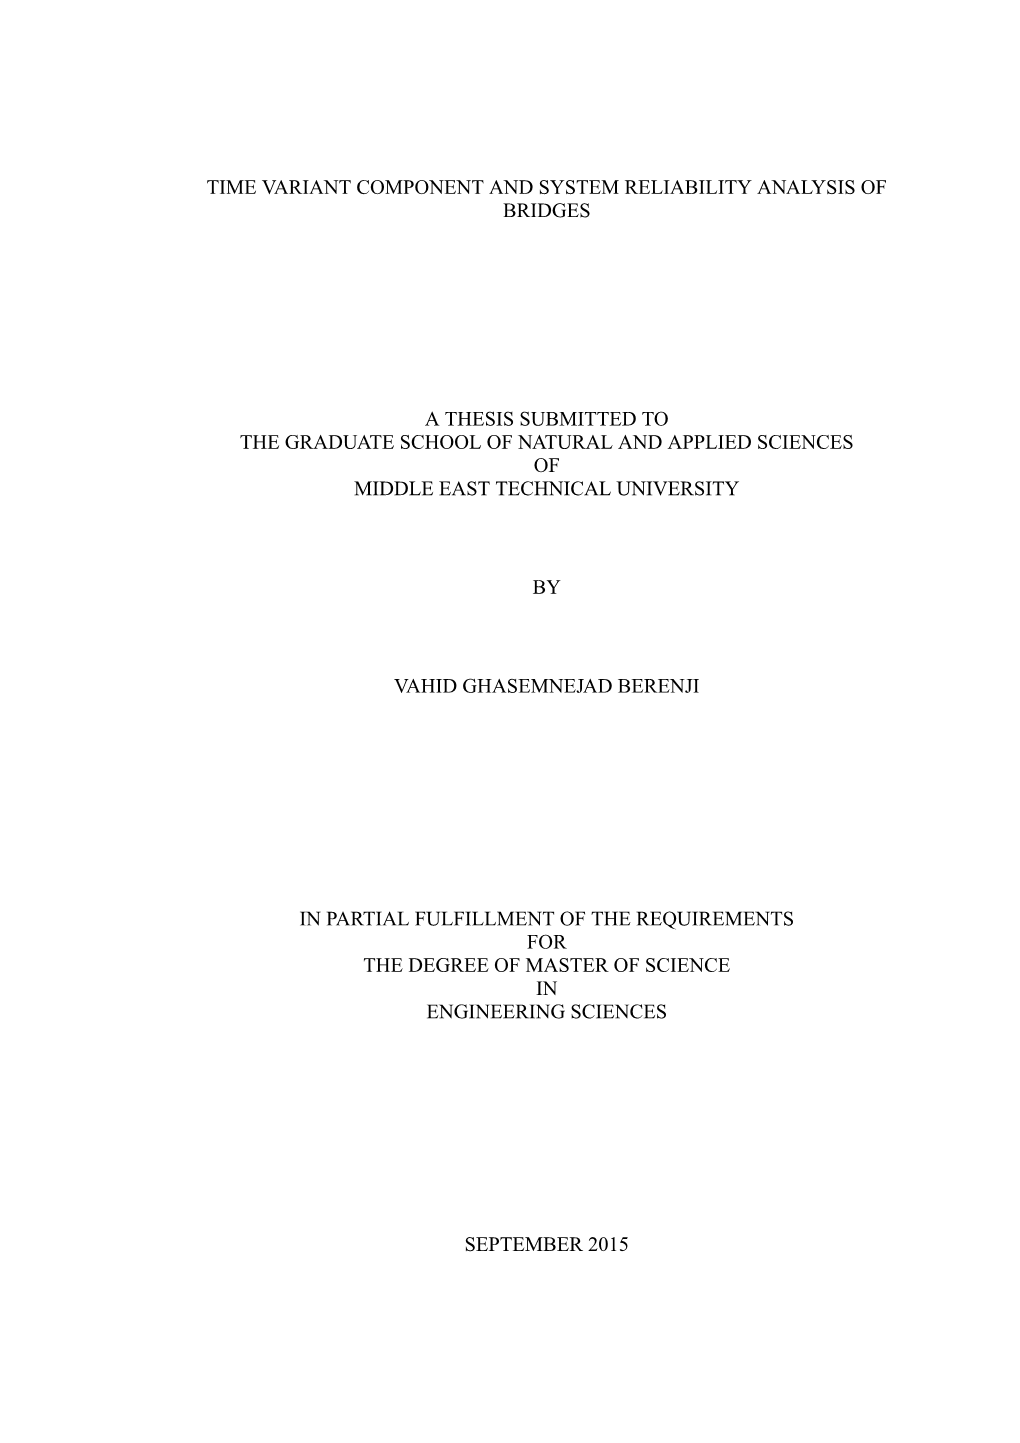 Time Variant Component and System Reliability Analysis of Bridges a Thesis Submitted to the Graduate School of Natural and Appli